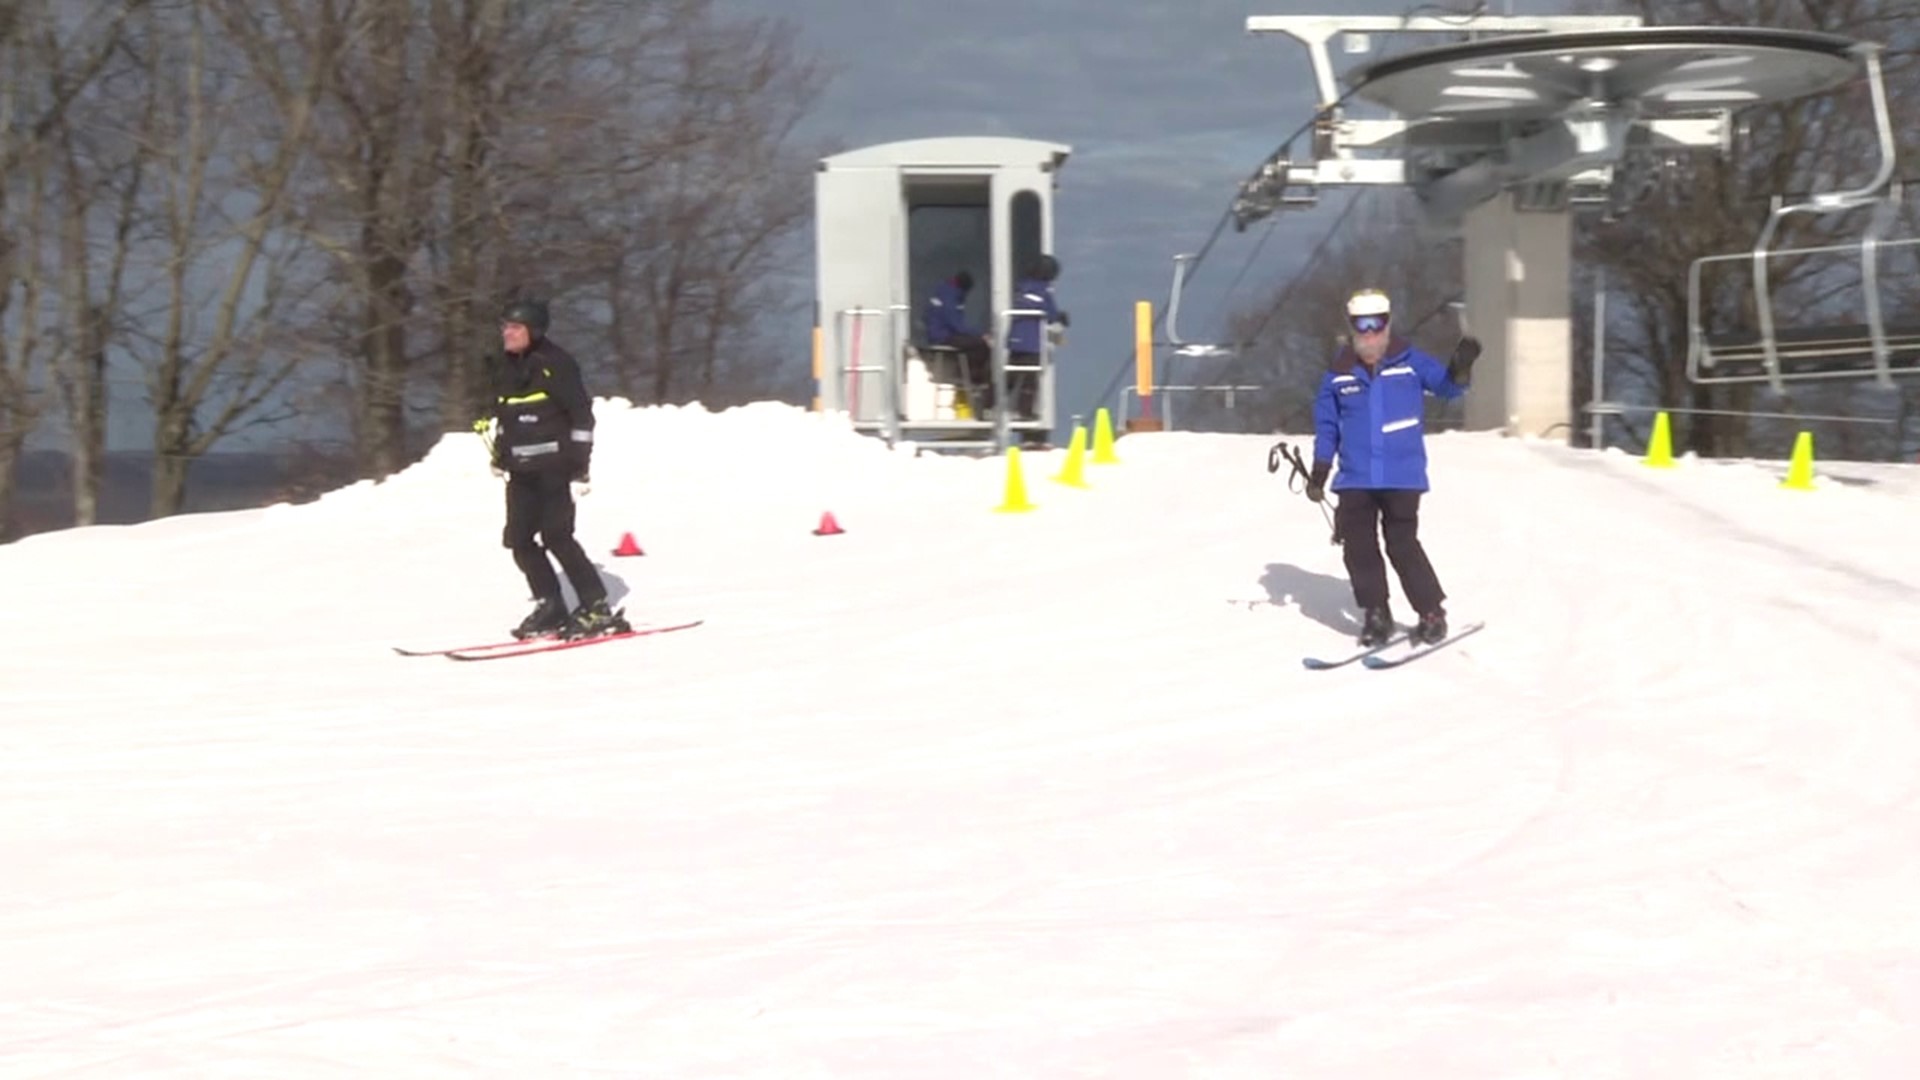 The resort opened its slopes Friday for the first time this season.